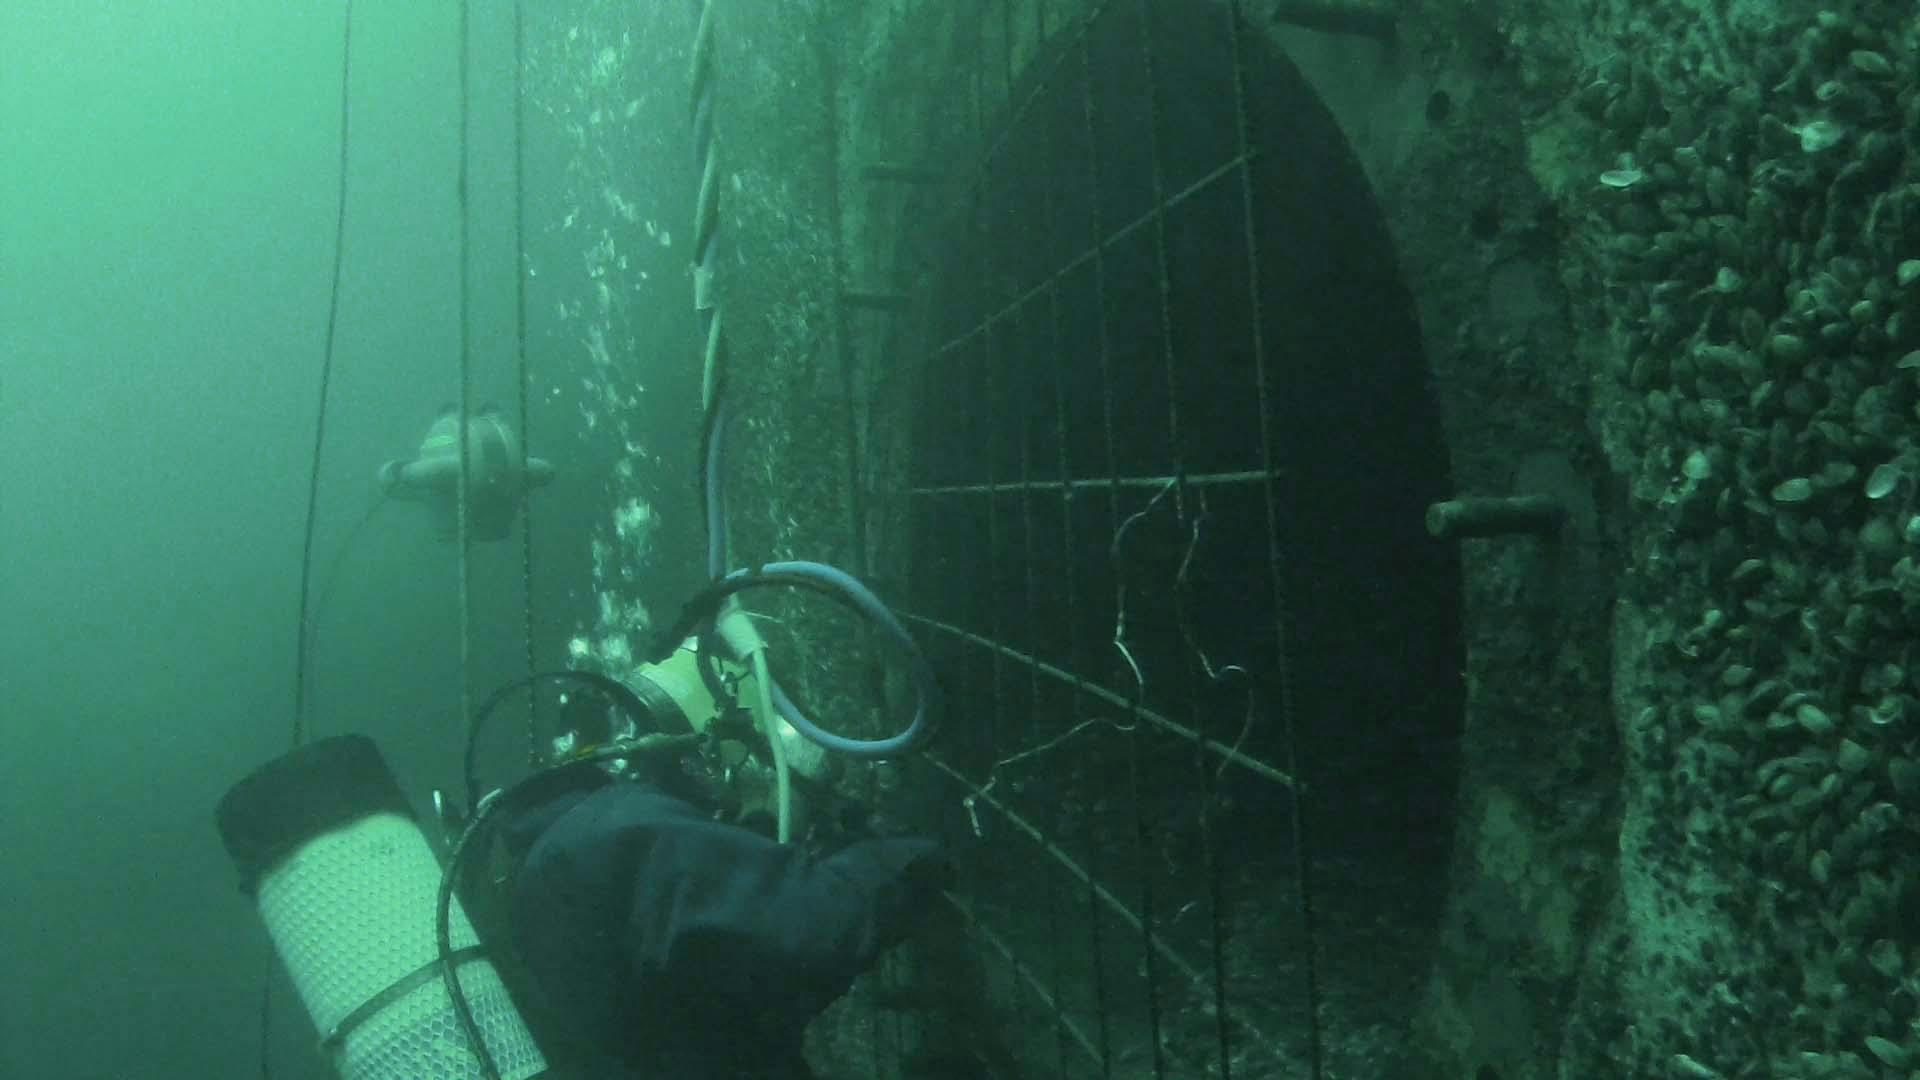 Scuba diver underwater at grate with DTG3 underwater ROV swimming behind diver. 